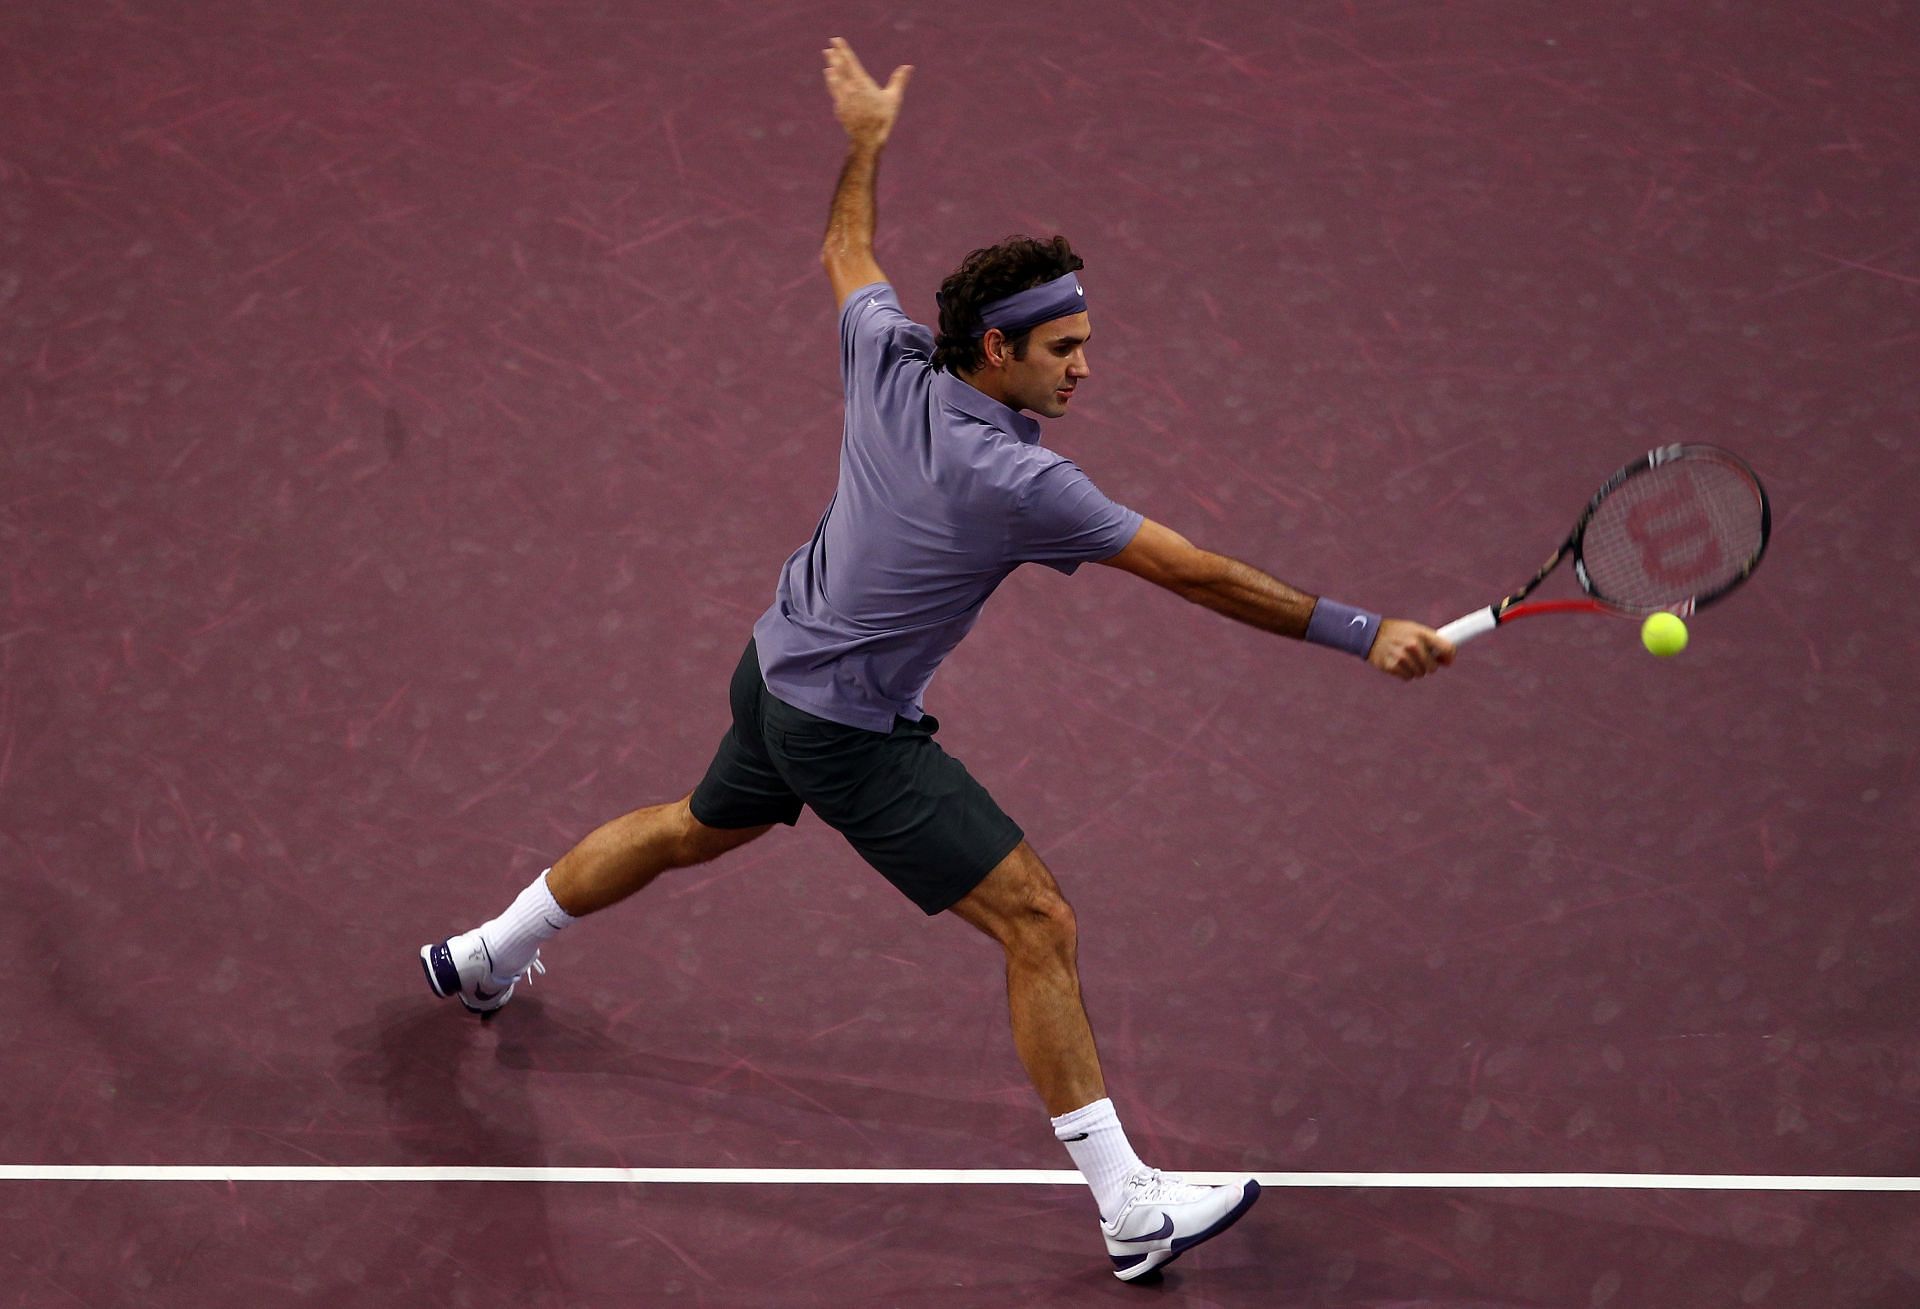 Roger Federer is slated to play in Laver Cup in September and Basel in October